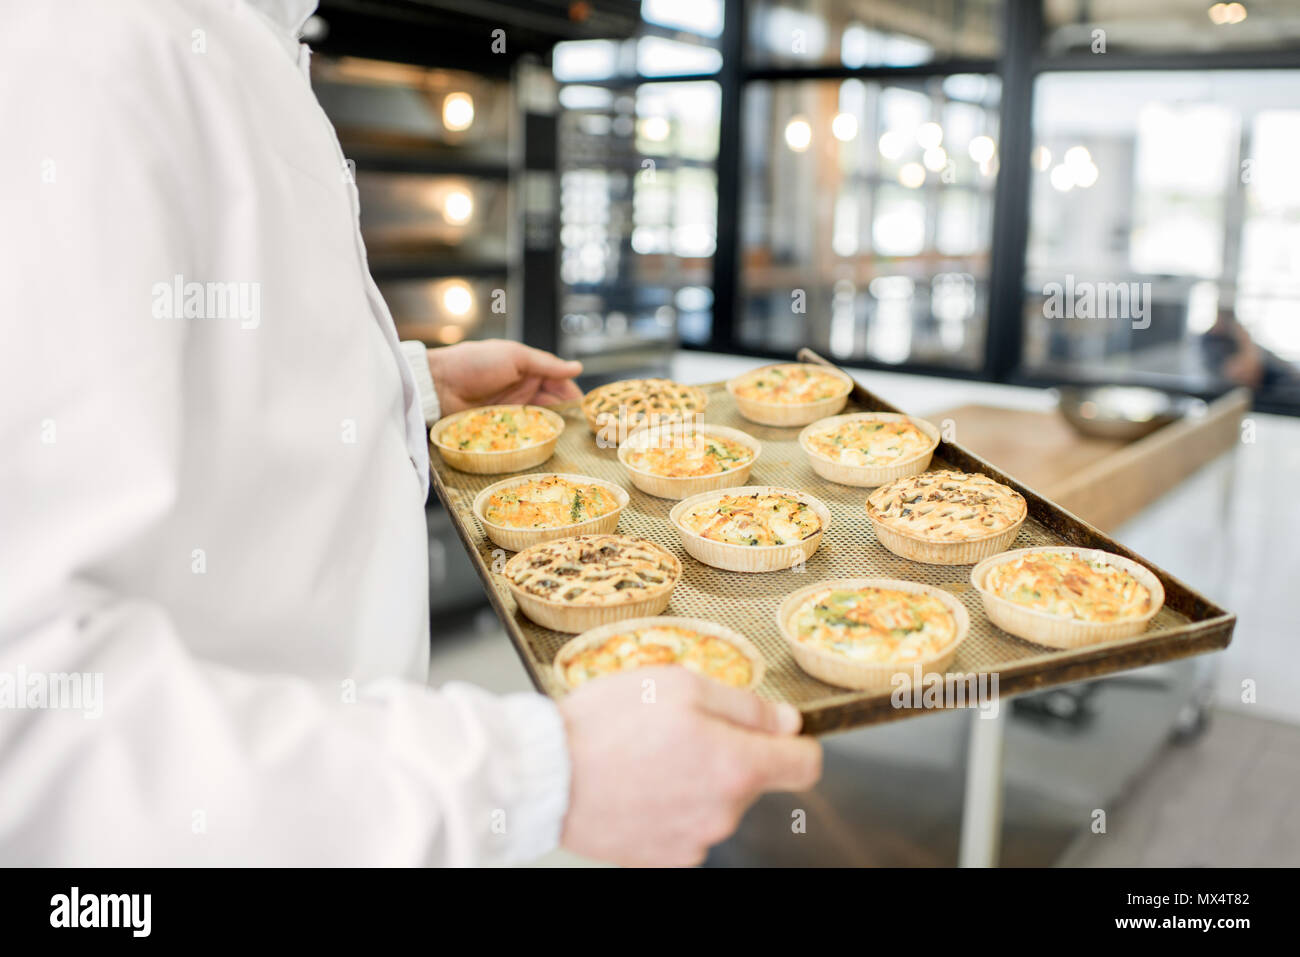 Holding tray with freshly baked buns Stock Photo